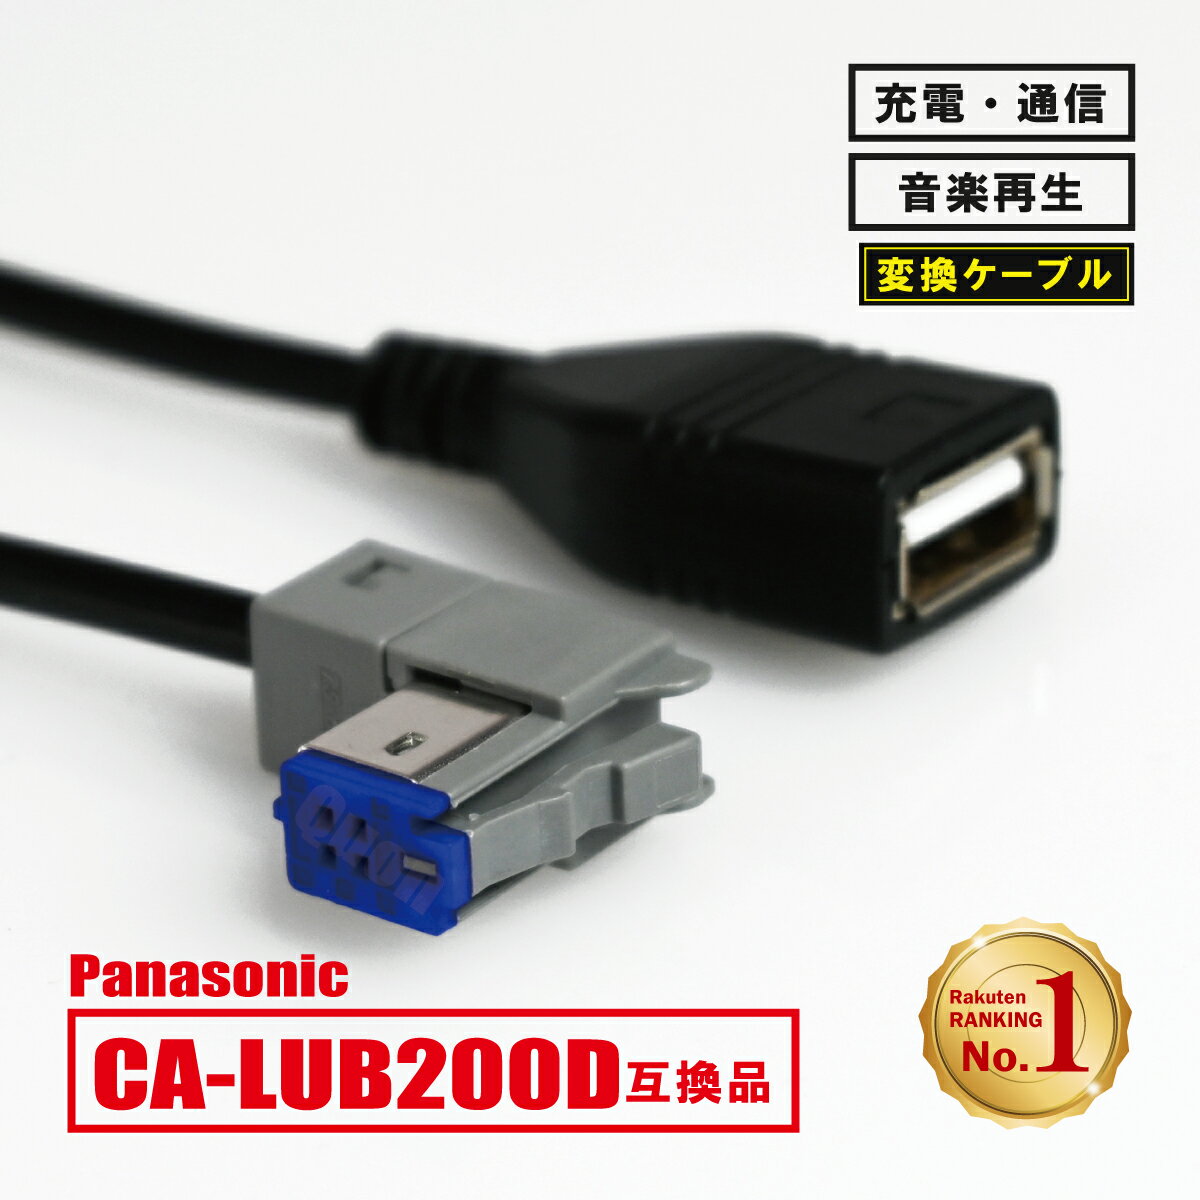 ѥʥ˥å ȥ顼 CA-LUB200D ߴ USB֥ ʥ CN-RX05WD CN-RA05WD CN-RE05WD 